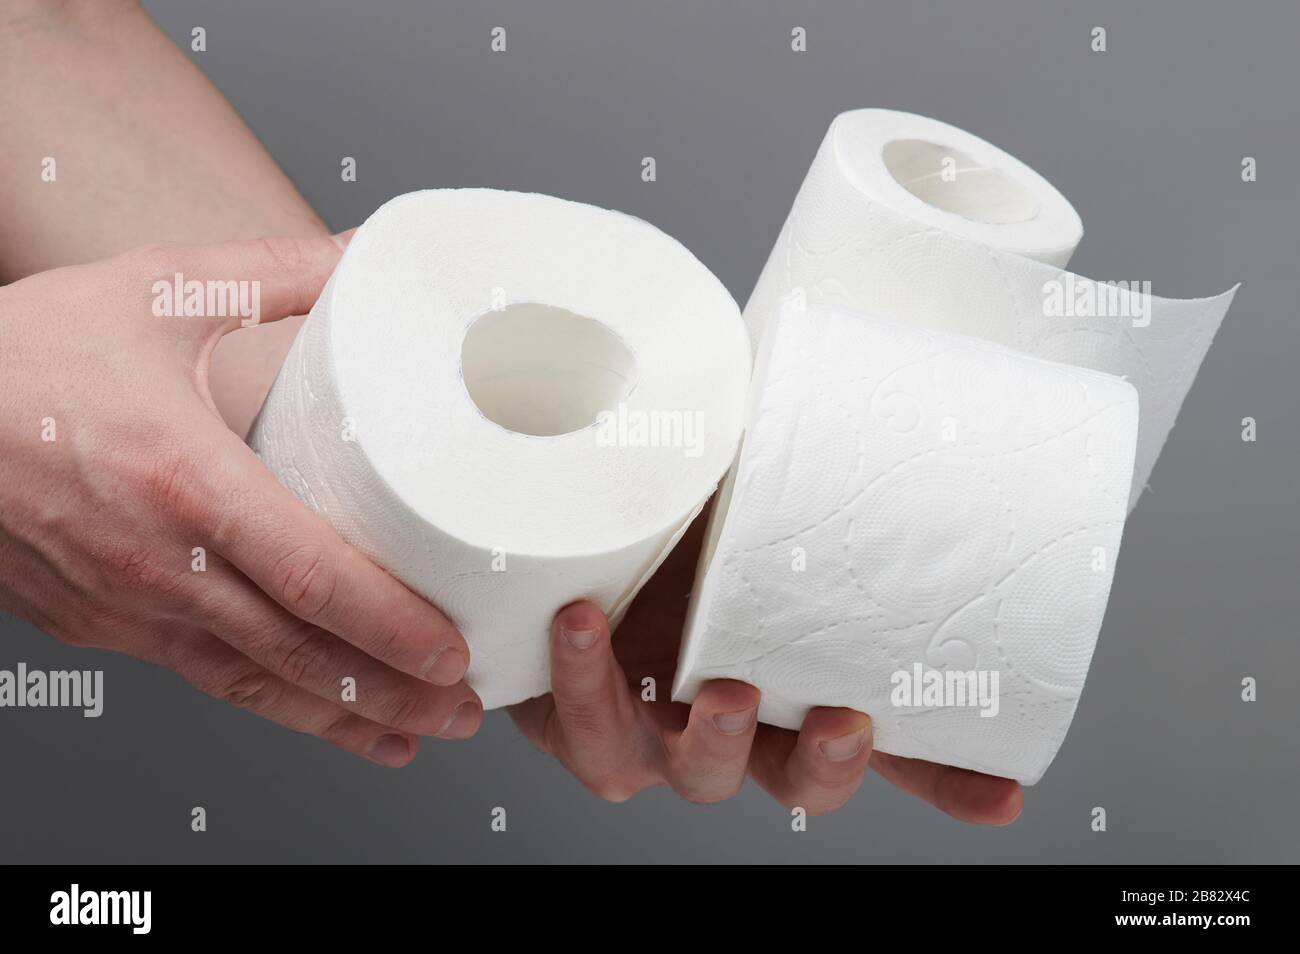 Pile of toilet paper in hand cllose up view Stock Photo